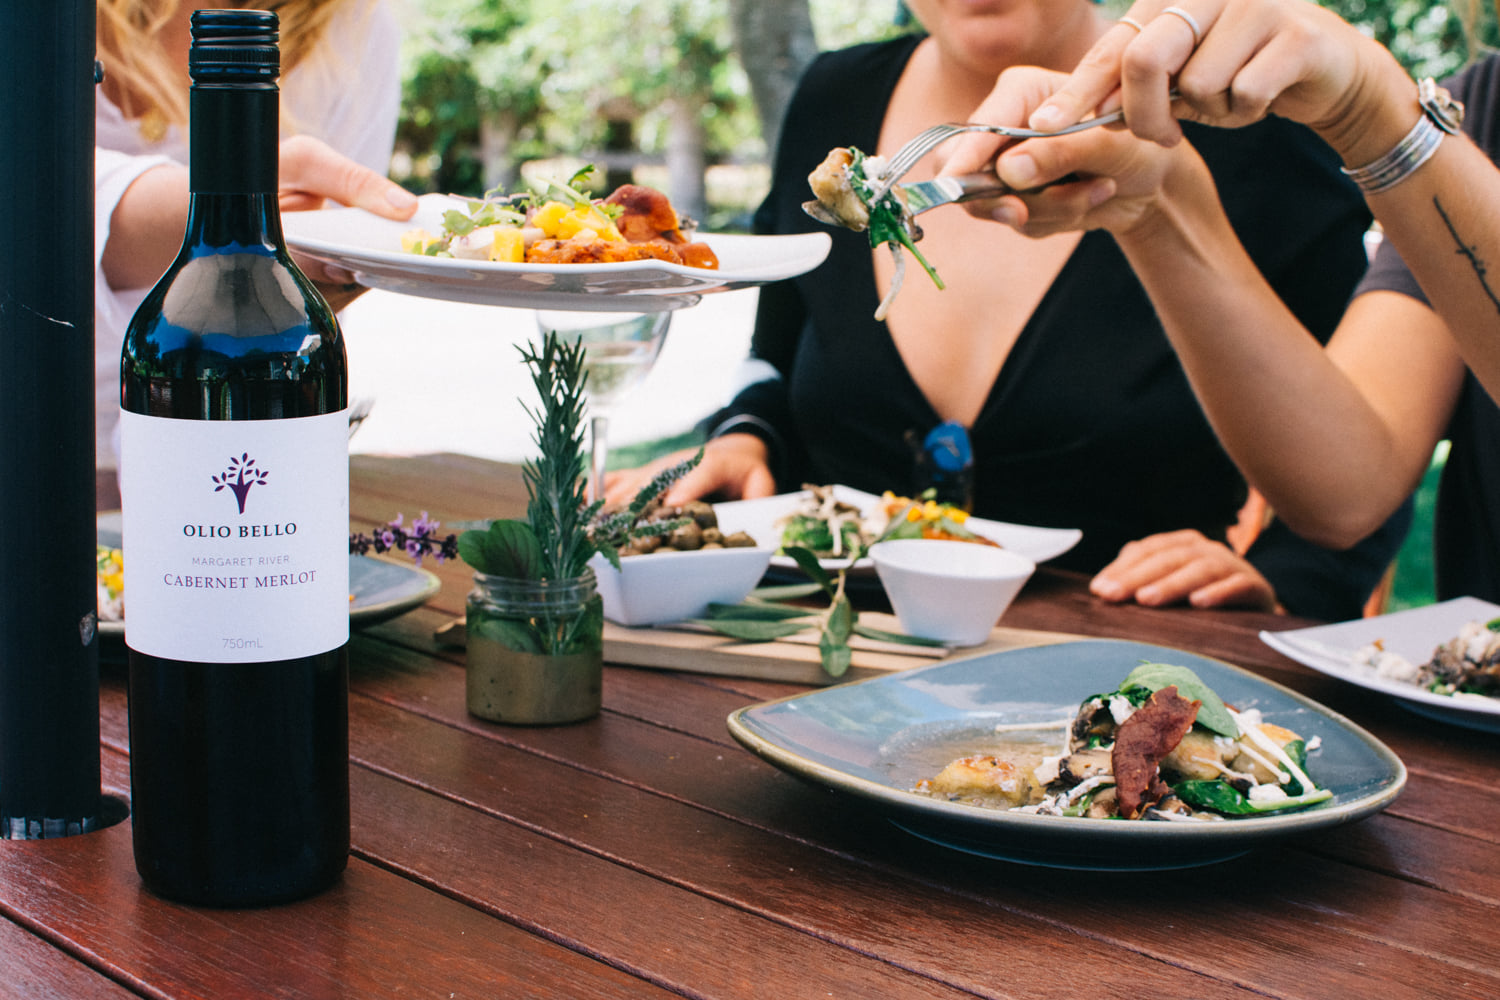 Guests dining alfresco at Olio Bello Cafe, Margaret River.